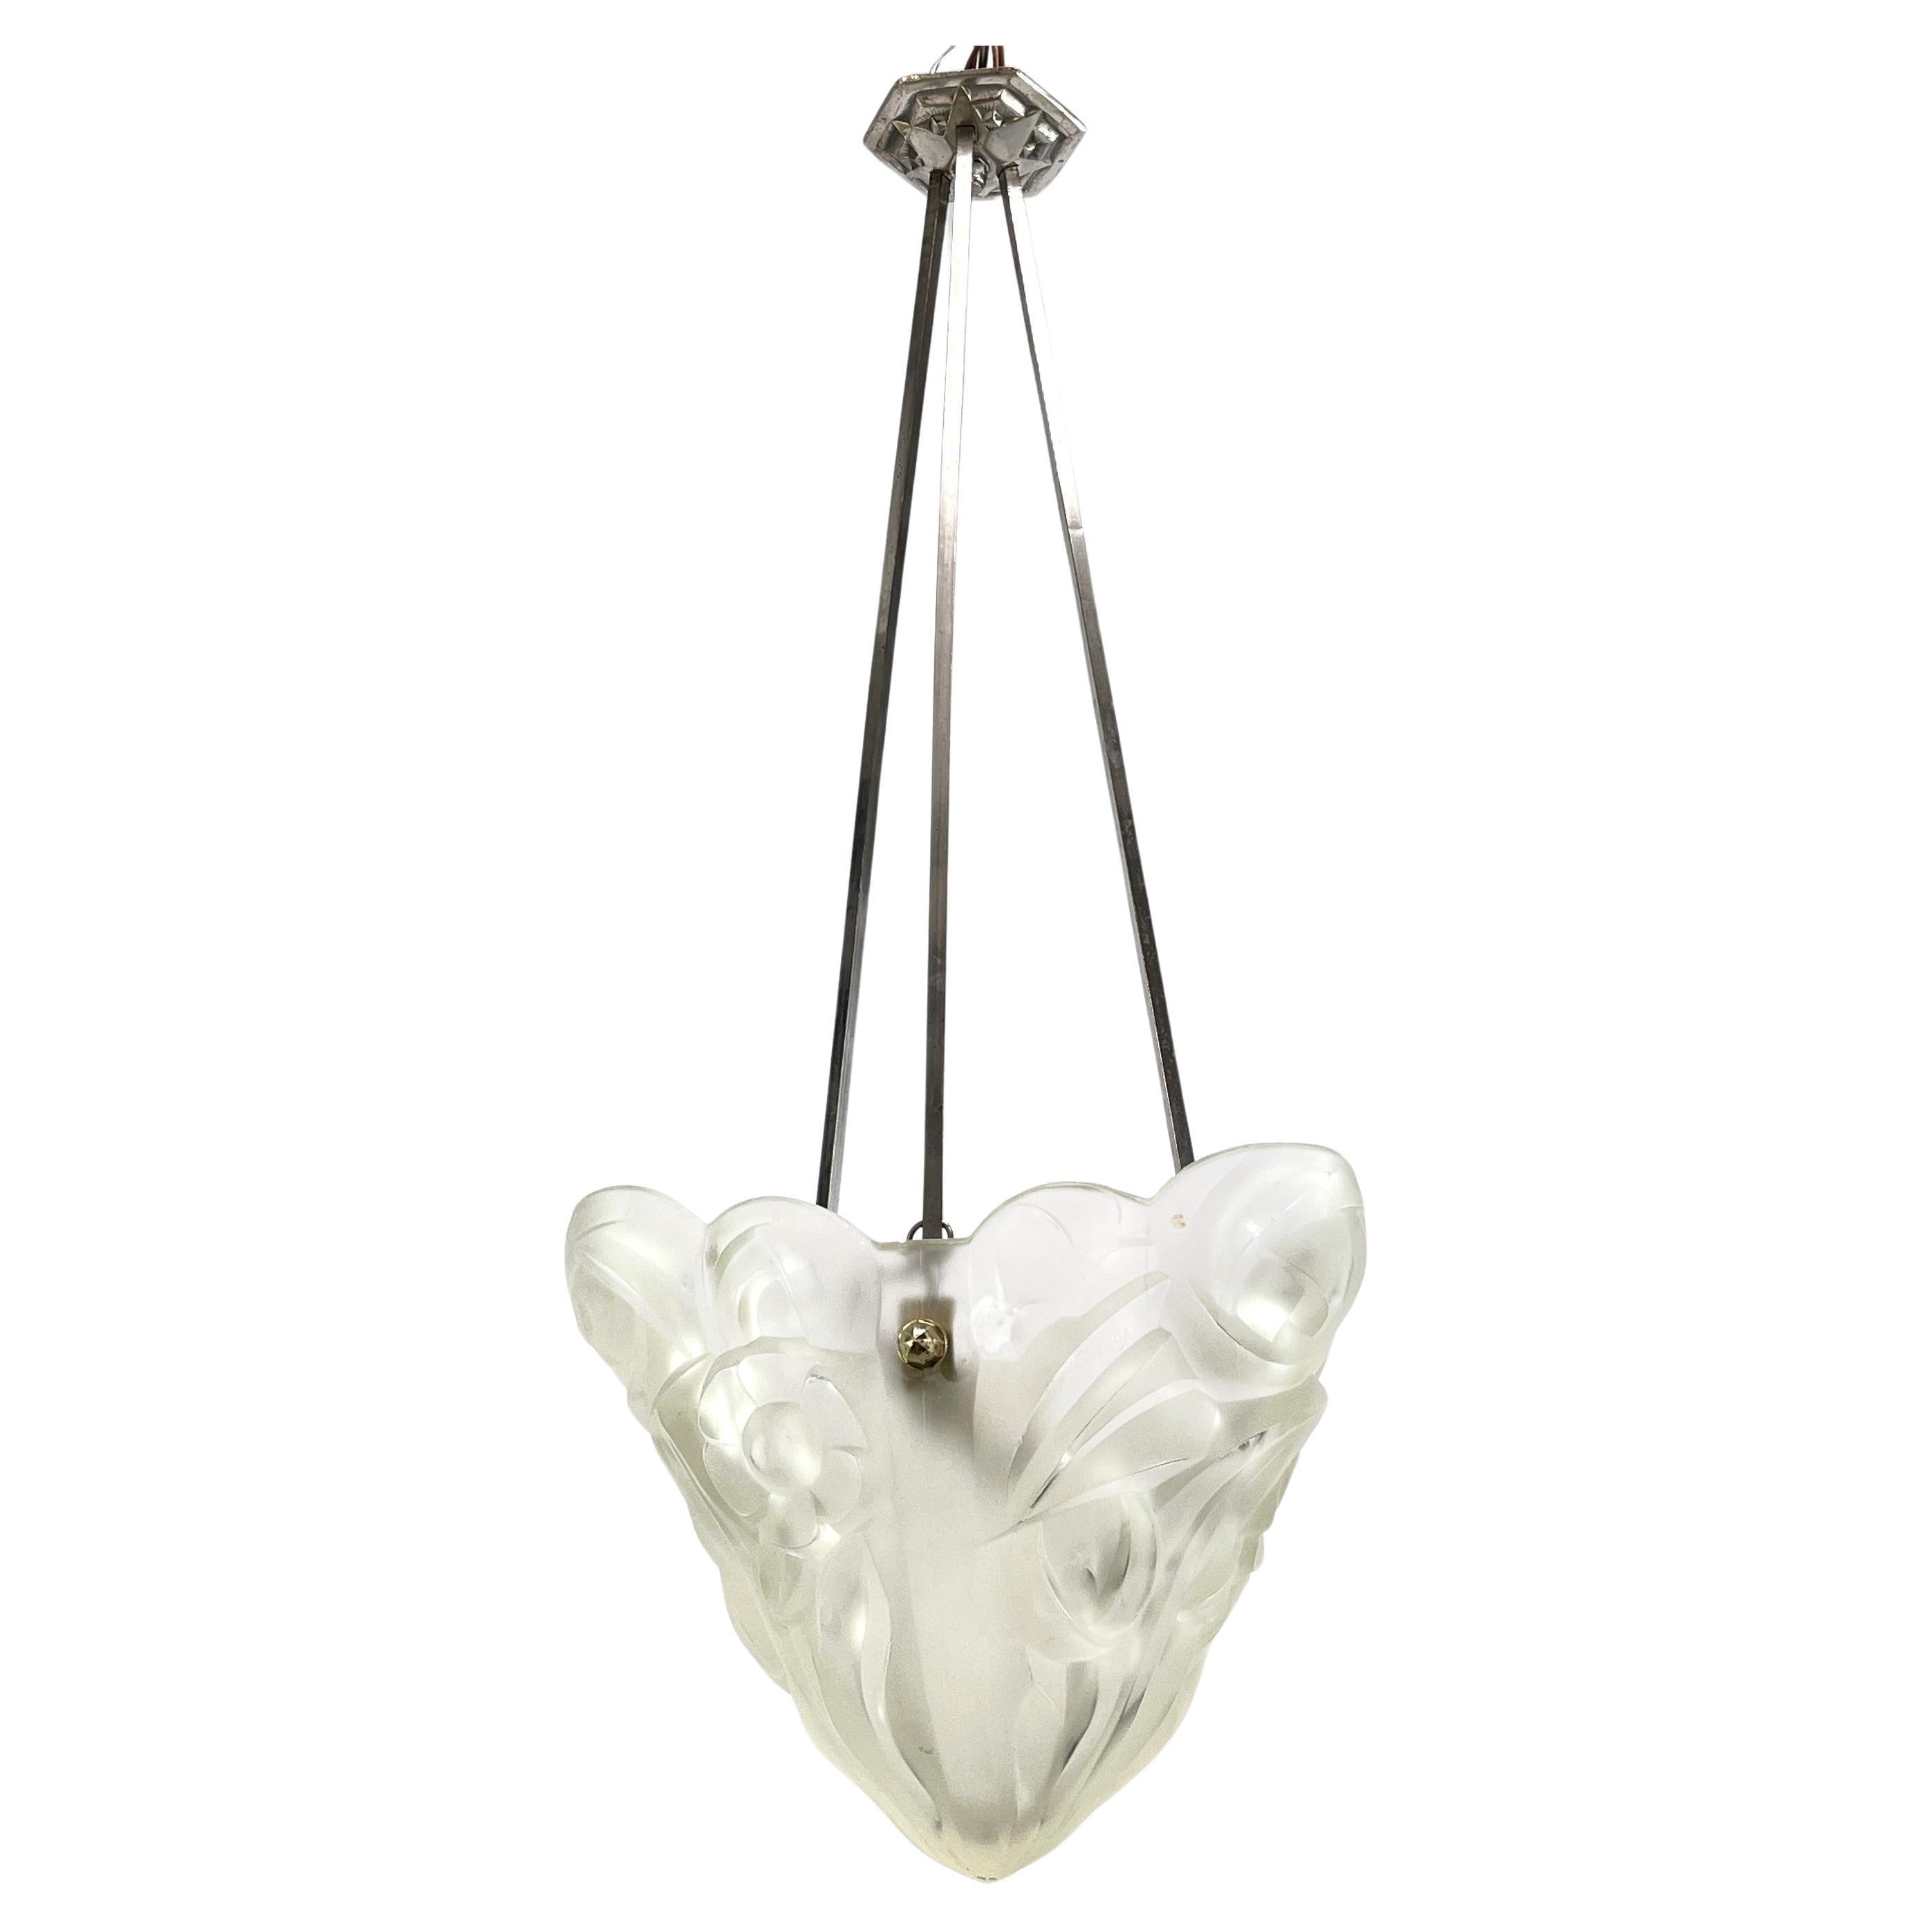 Art Deco Chandelier Hanging Lamp by Dégue, 1930s For Sale